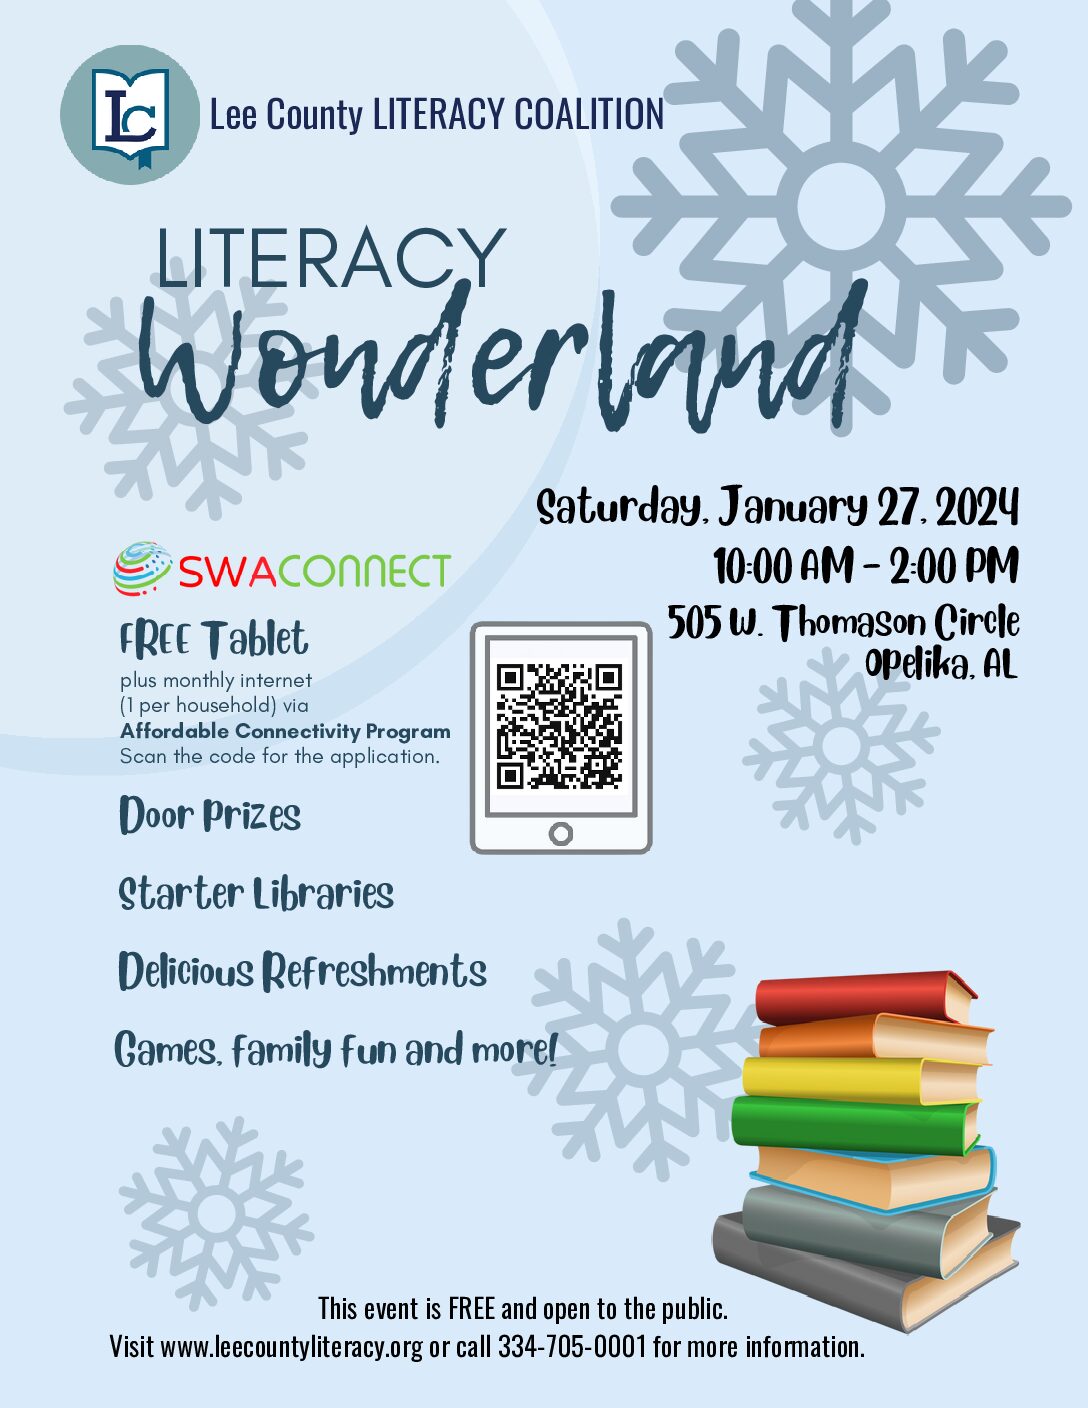 Lee Co. Literacy Coalition to offer technology workshop